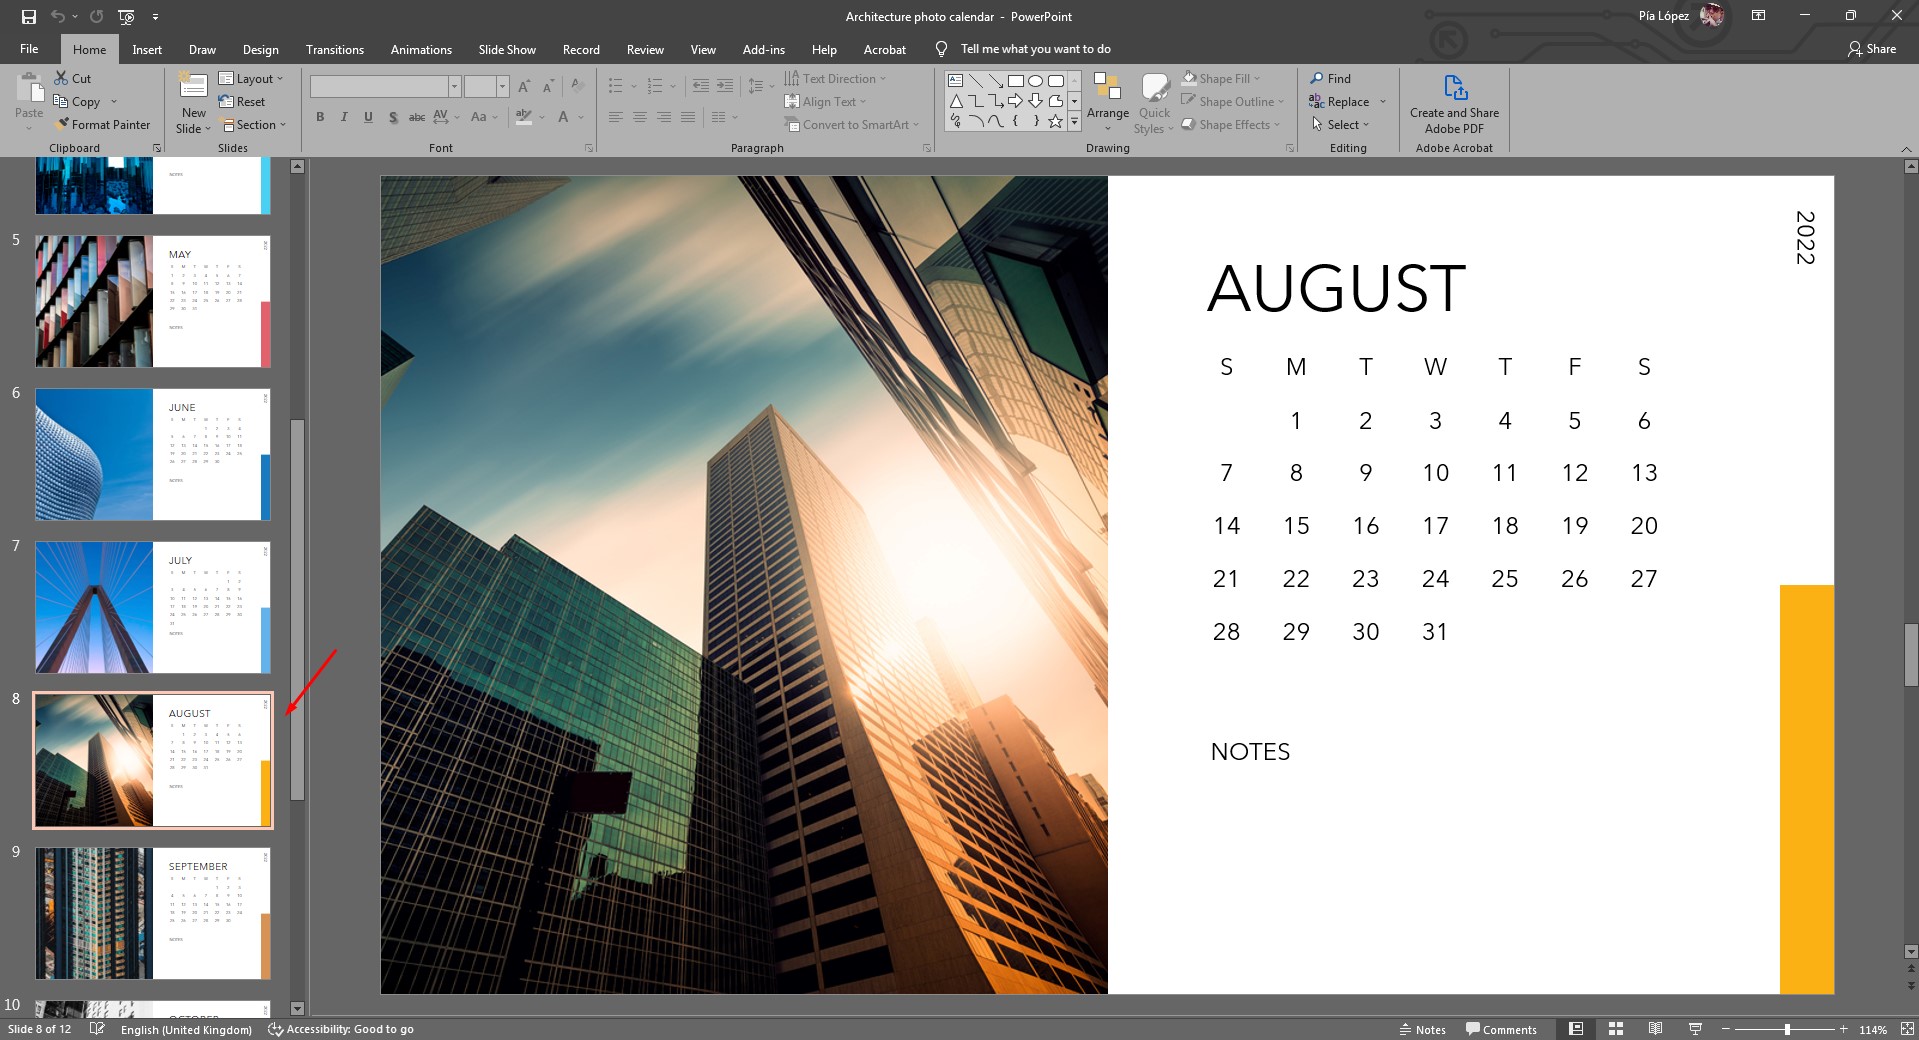 Preparing the calendar to be inserted in PowerPoint